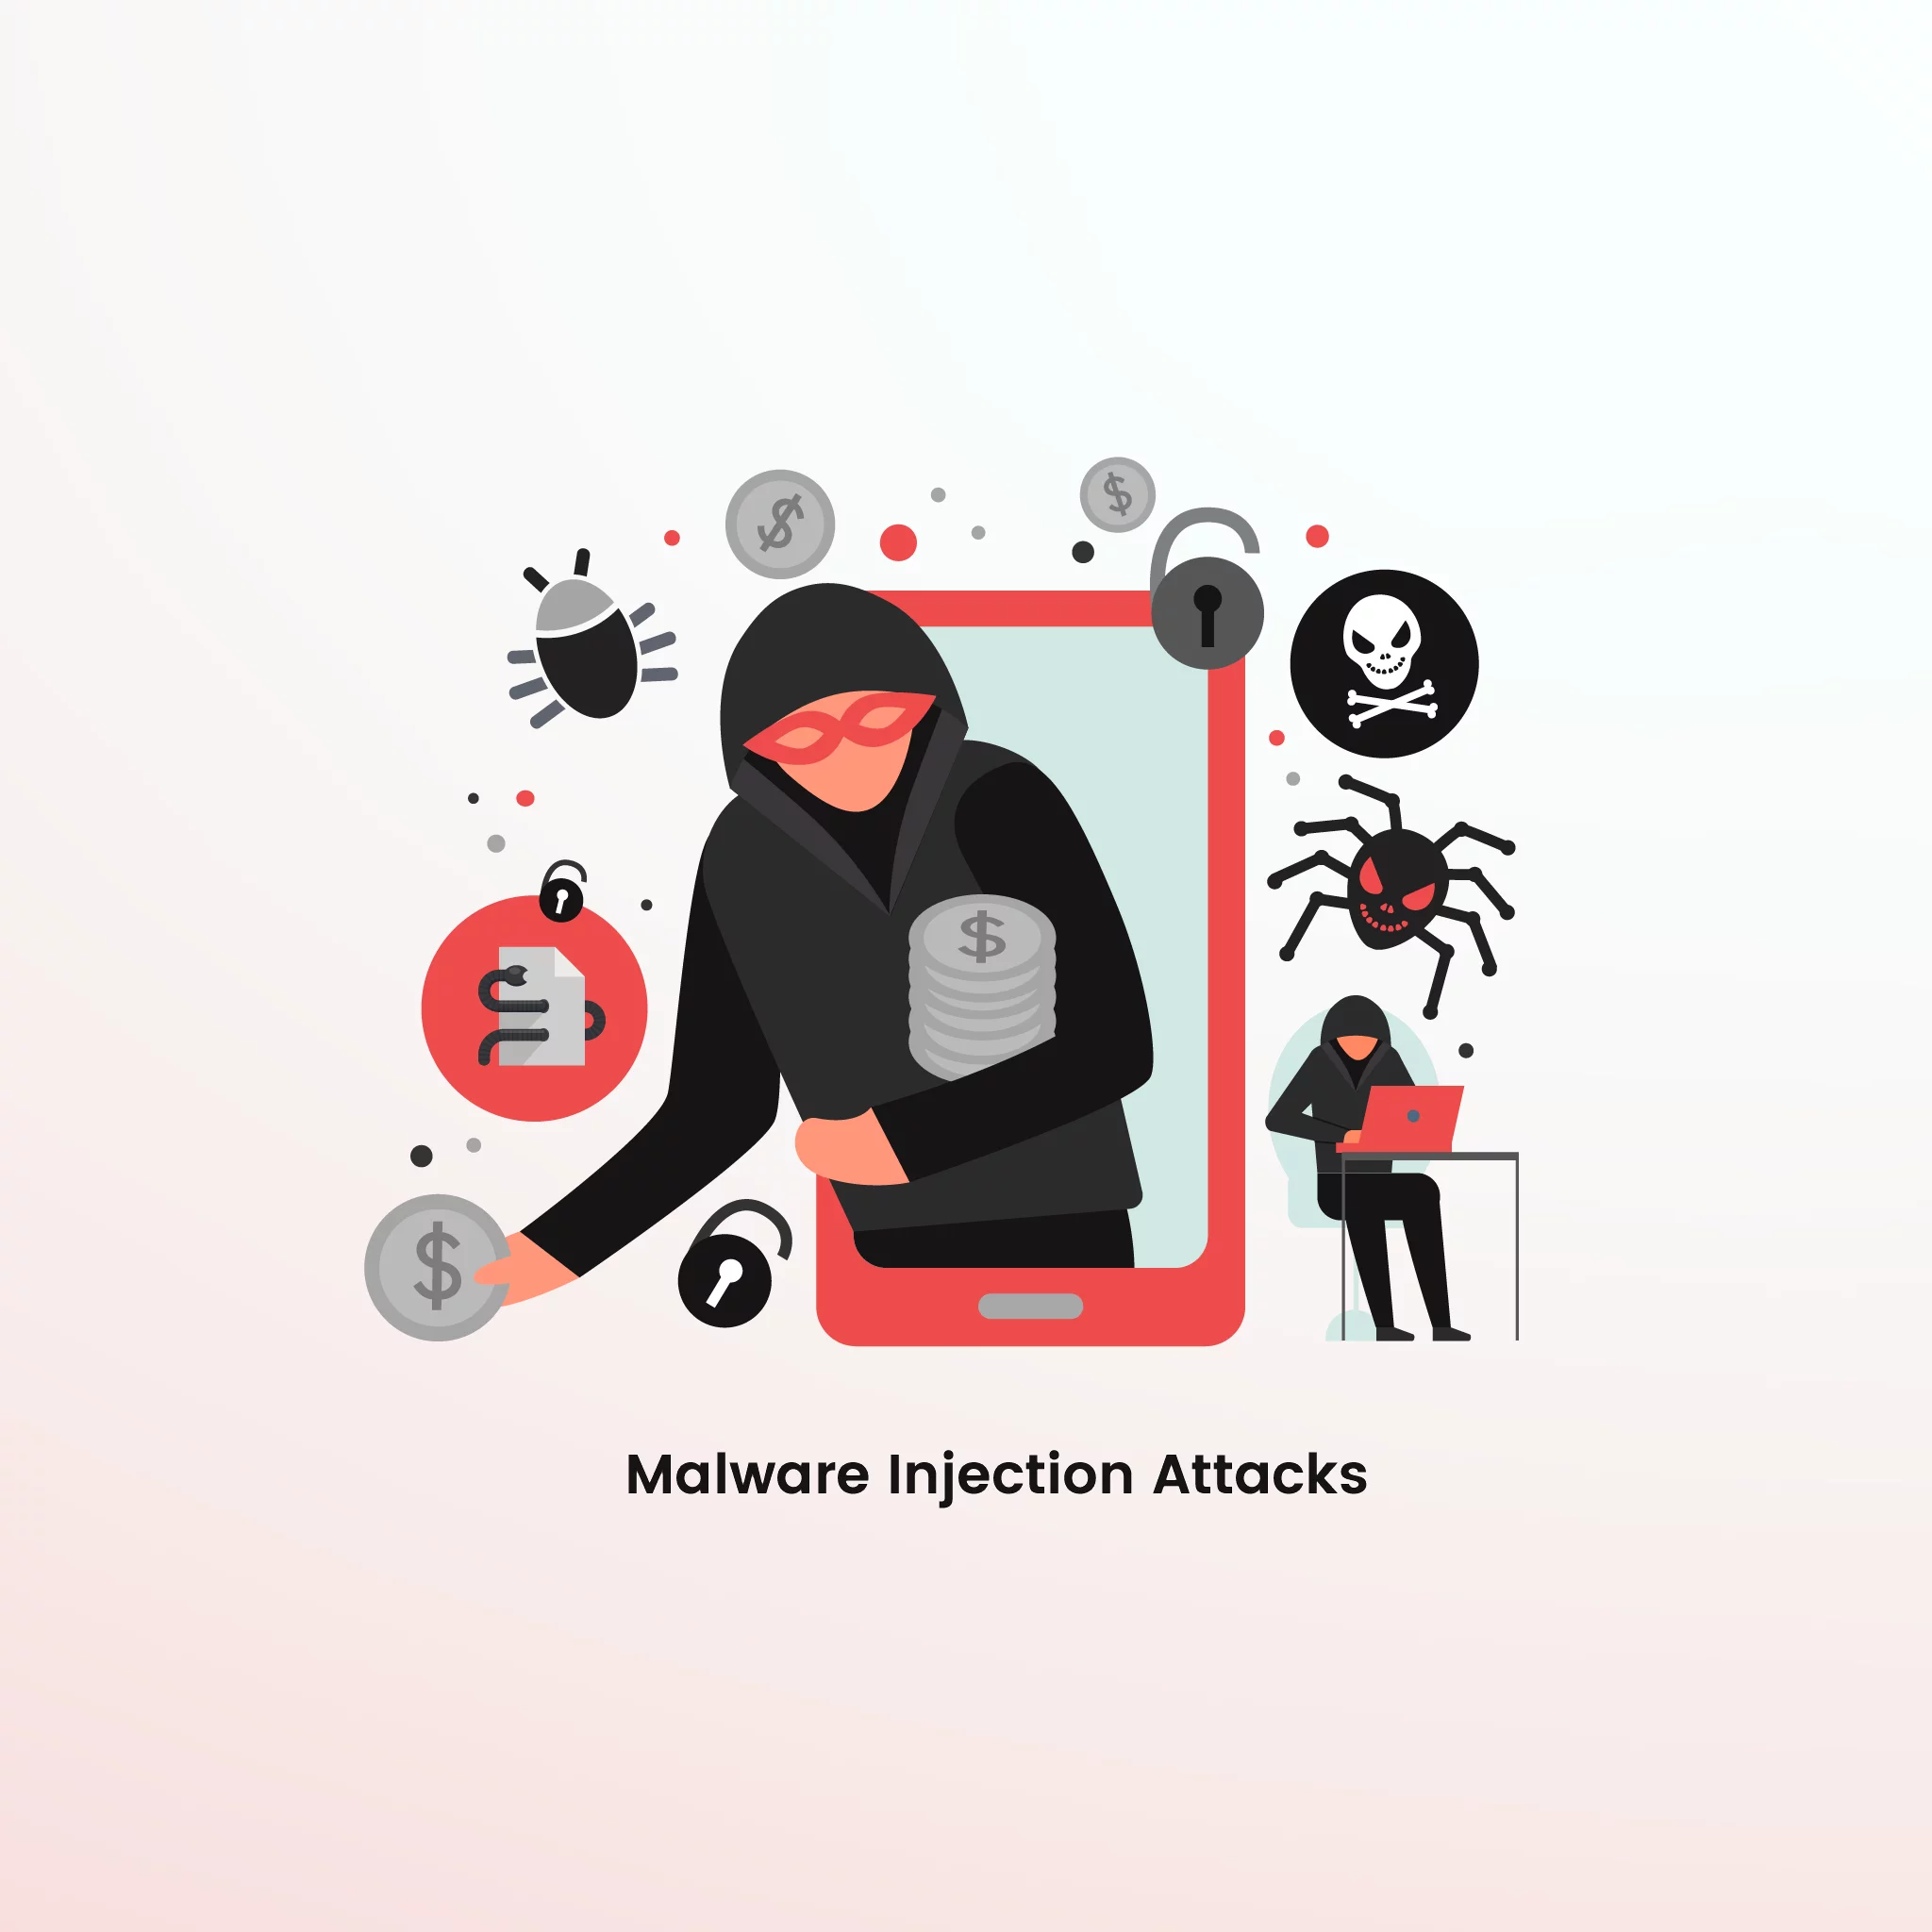 Types of Malware injection attacks: how attackers steal data, illustrated with malware icons.